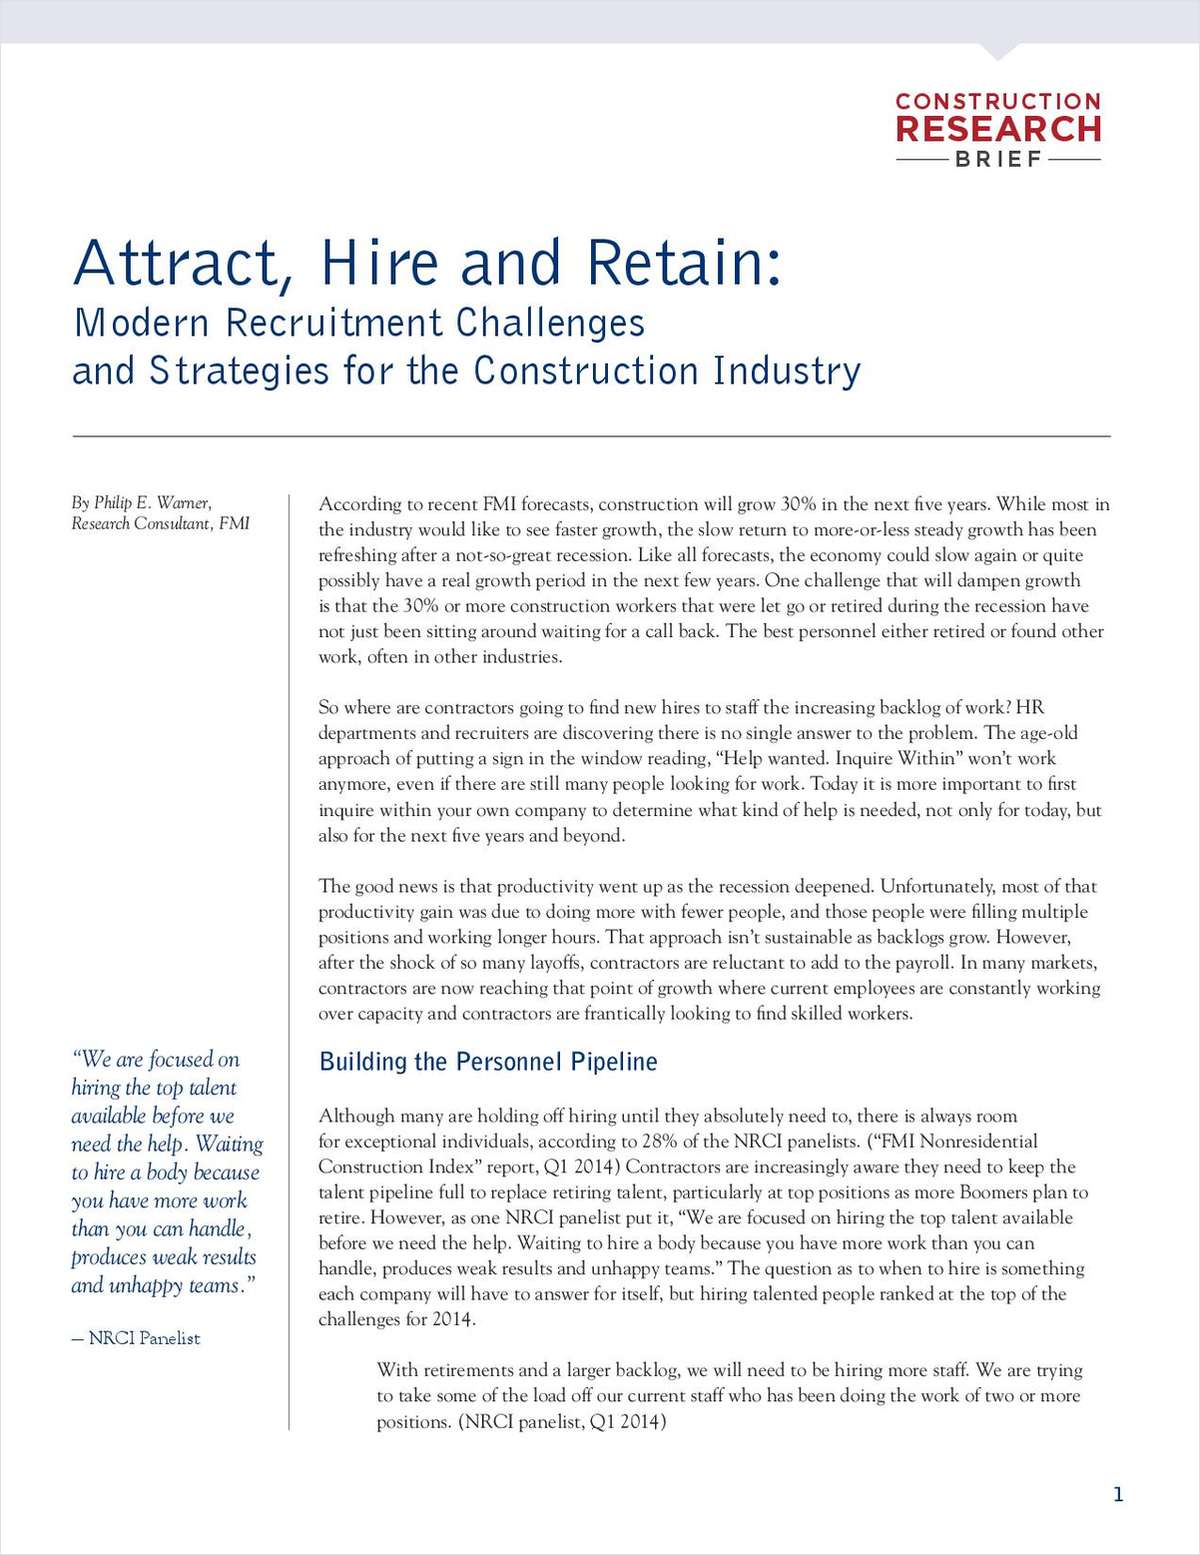 Attract, Hire and Retain: Modern Recruitment Challenges and Strategies for the Construction Industry